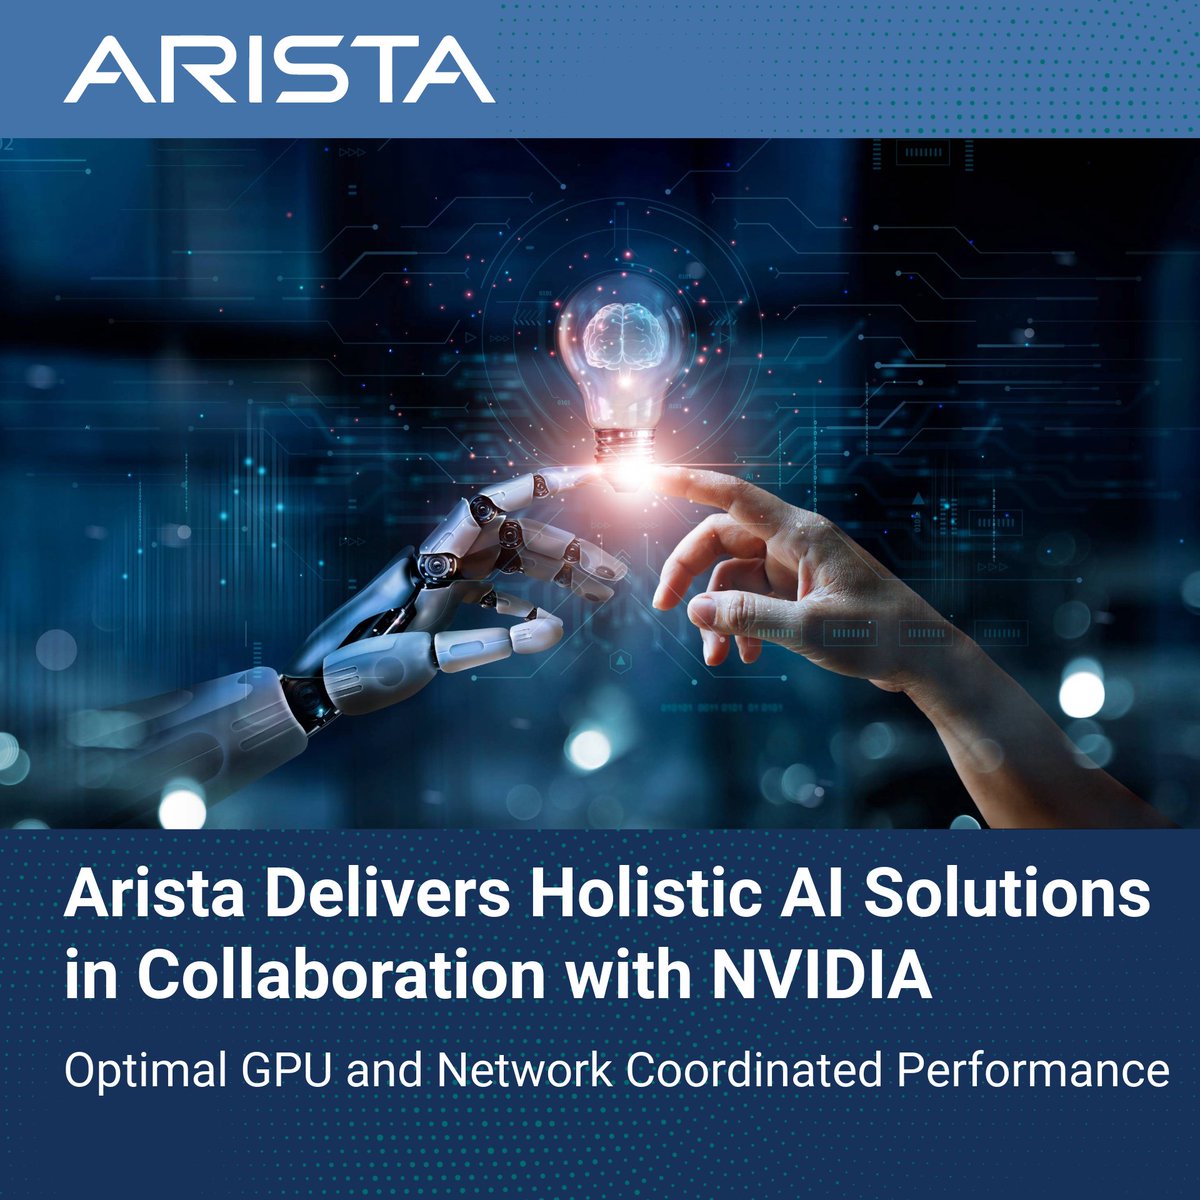 Arista delivers holistic AI Solutions in collaboration with NVIDIA for optimal GPU and network coordinated performance. Learn more here: bit.ly/4bVSU8e

#AI #Arista